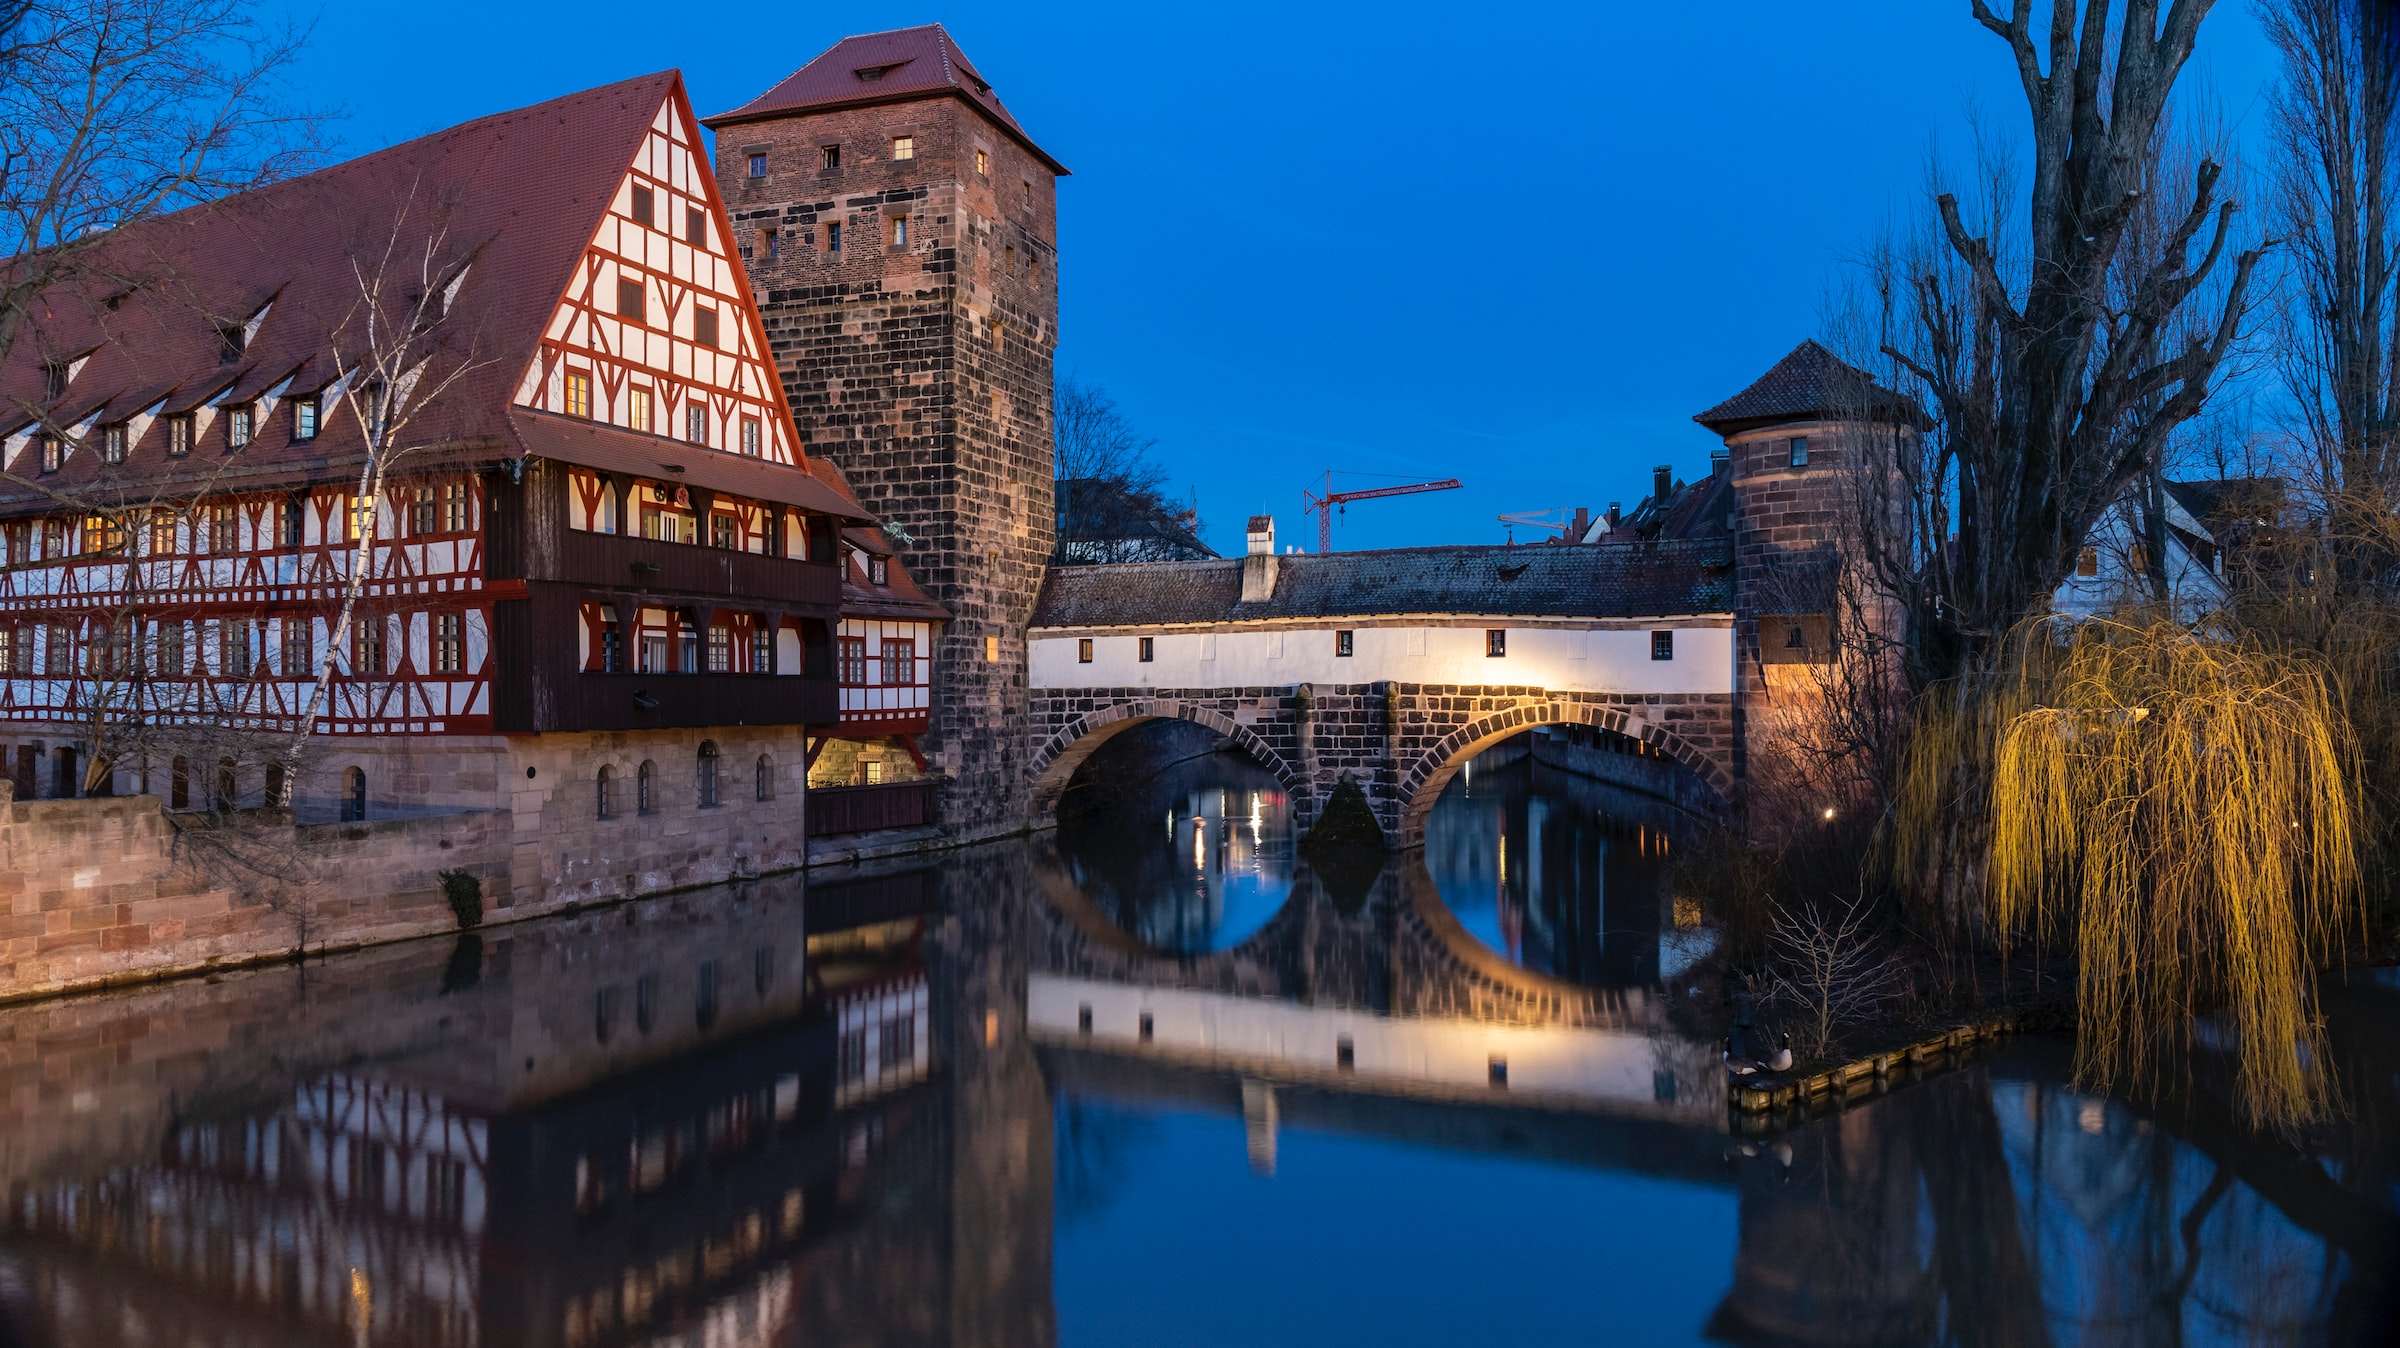 To Nuremberg: A letter to the city I fell in love with and will be forever